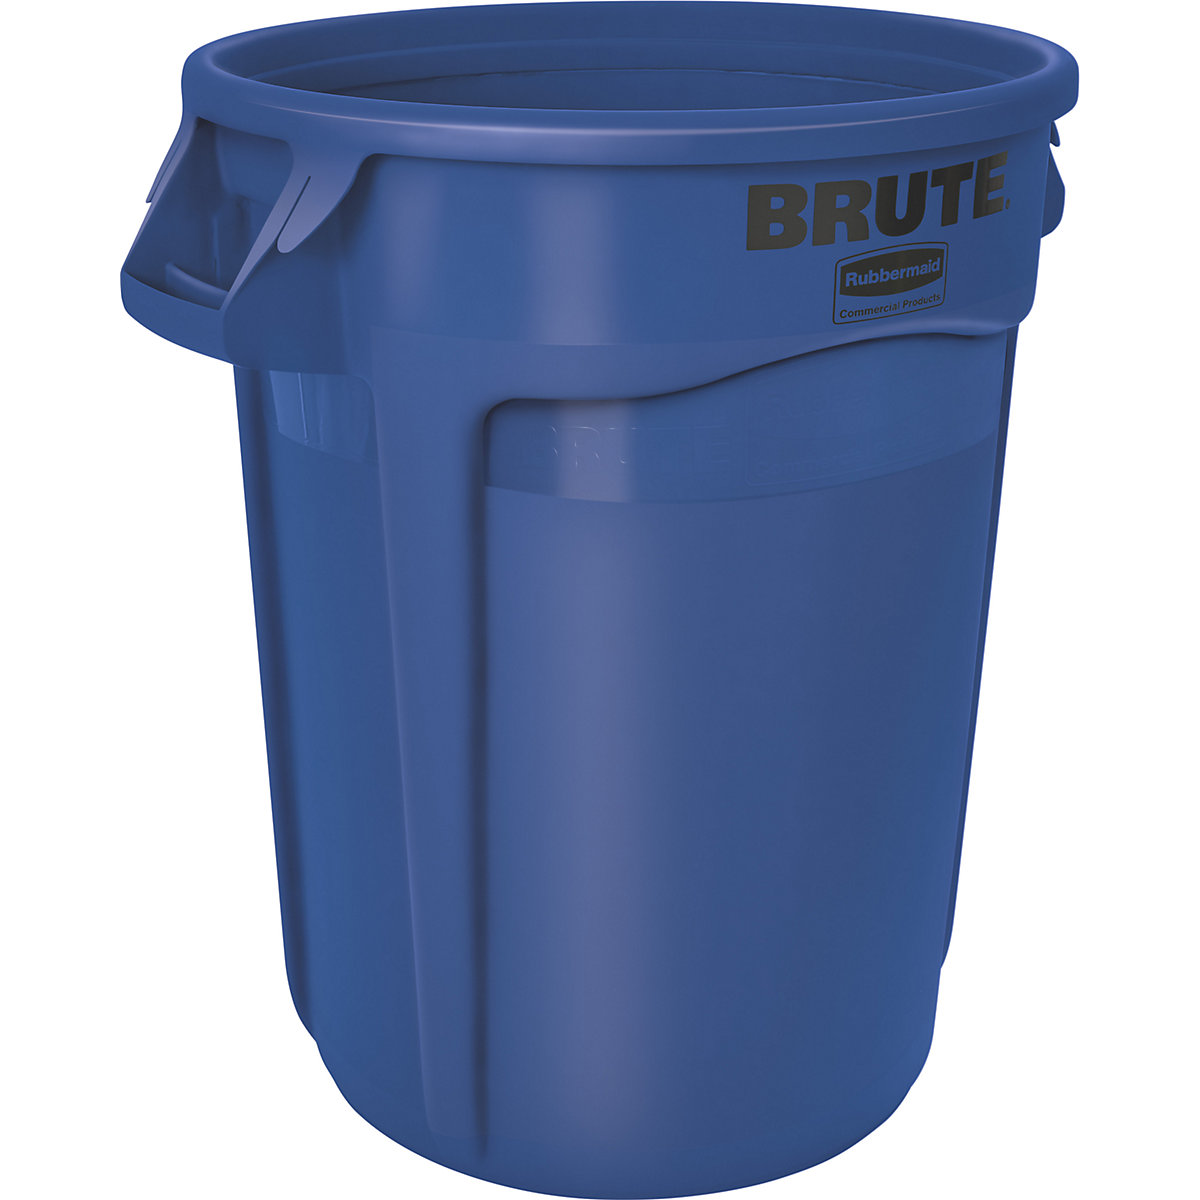 BRUTE® universal container, round – Rubbermaid, capacity 121 l, blue-11